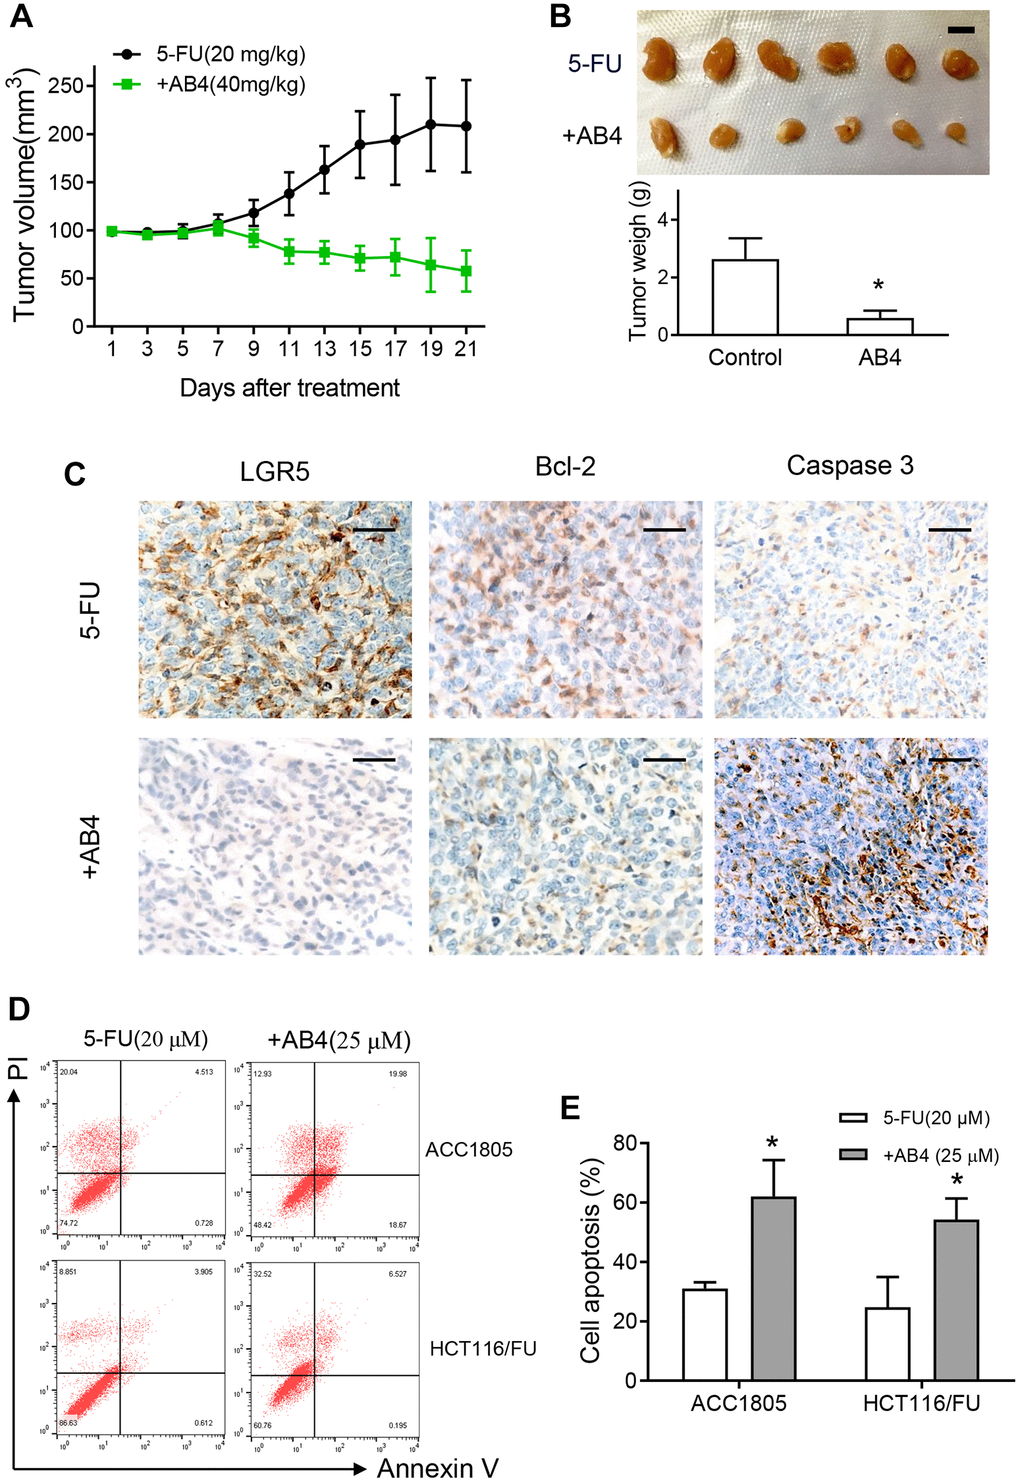 AB4 promotes apoptotic cell death of 5-FU resistant colorectal cancer cells. (A) Xenografts of HCT116/FU cells were implanted subcutaneously until the volume was about 100 mm3 in nude mice. The mice were treated with intravenous infusion of 5-FU (20 mg/kg) or combined with AB4 (40 mg/kg) every three days. Tumor volume was measured in the indicated day. The curves showed the mean volume ± SEM of tumor size. (B) Xenografts were harvested and imagined after 21 days treatment. The tumor volumes were compared between groups. Bar = 1 cm. (C) Representative IHC staining images of the expression of LGR5, bcl-2 and caspase 3 in the xenografts of different group. Bar, 50 μm. (D) HCT116/FU and ACC1805 cells were treated with 25 μM AB4 and 20 μM 5-FU for 48 h. Cells were collected and stained for cell apoptotic analysis by flow cytometry. (E) Statistical analysis of cell apoptosis in different groups as described in (D). The results represent three independent experiments. Data are shown as means ± SEM. *P 